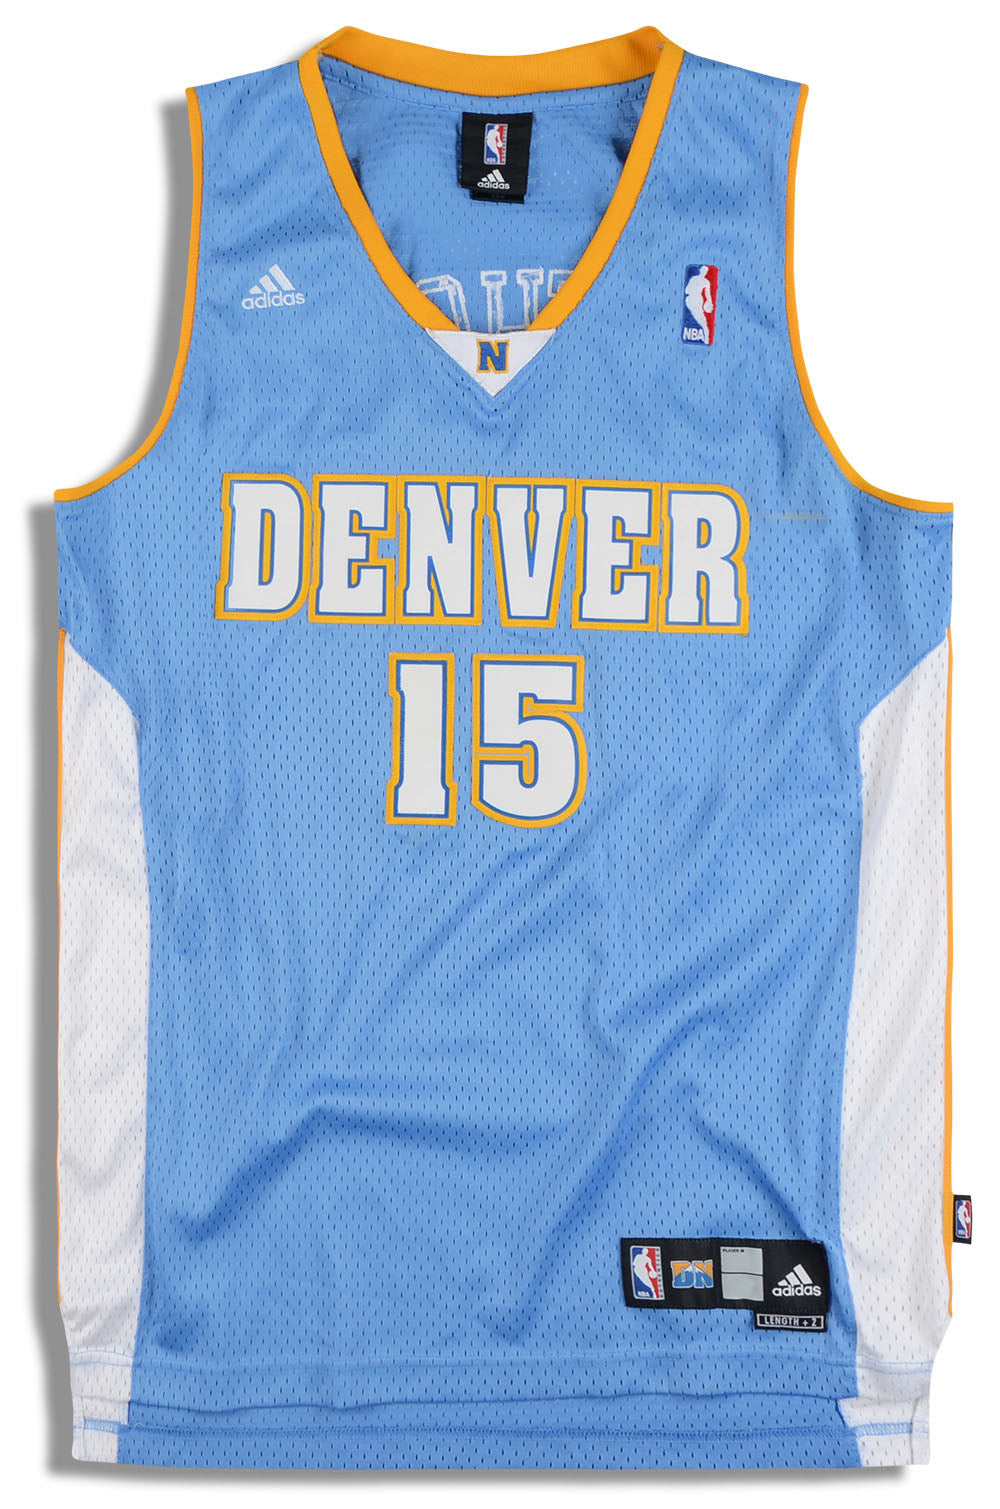 Adidas Denver Nuggets Blue Yellow Jersey #15 Anthony Size XL